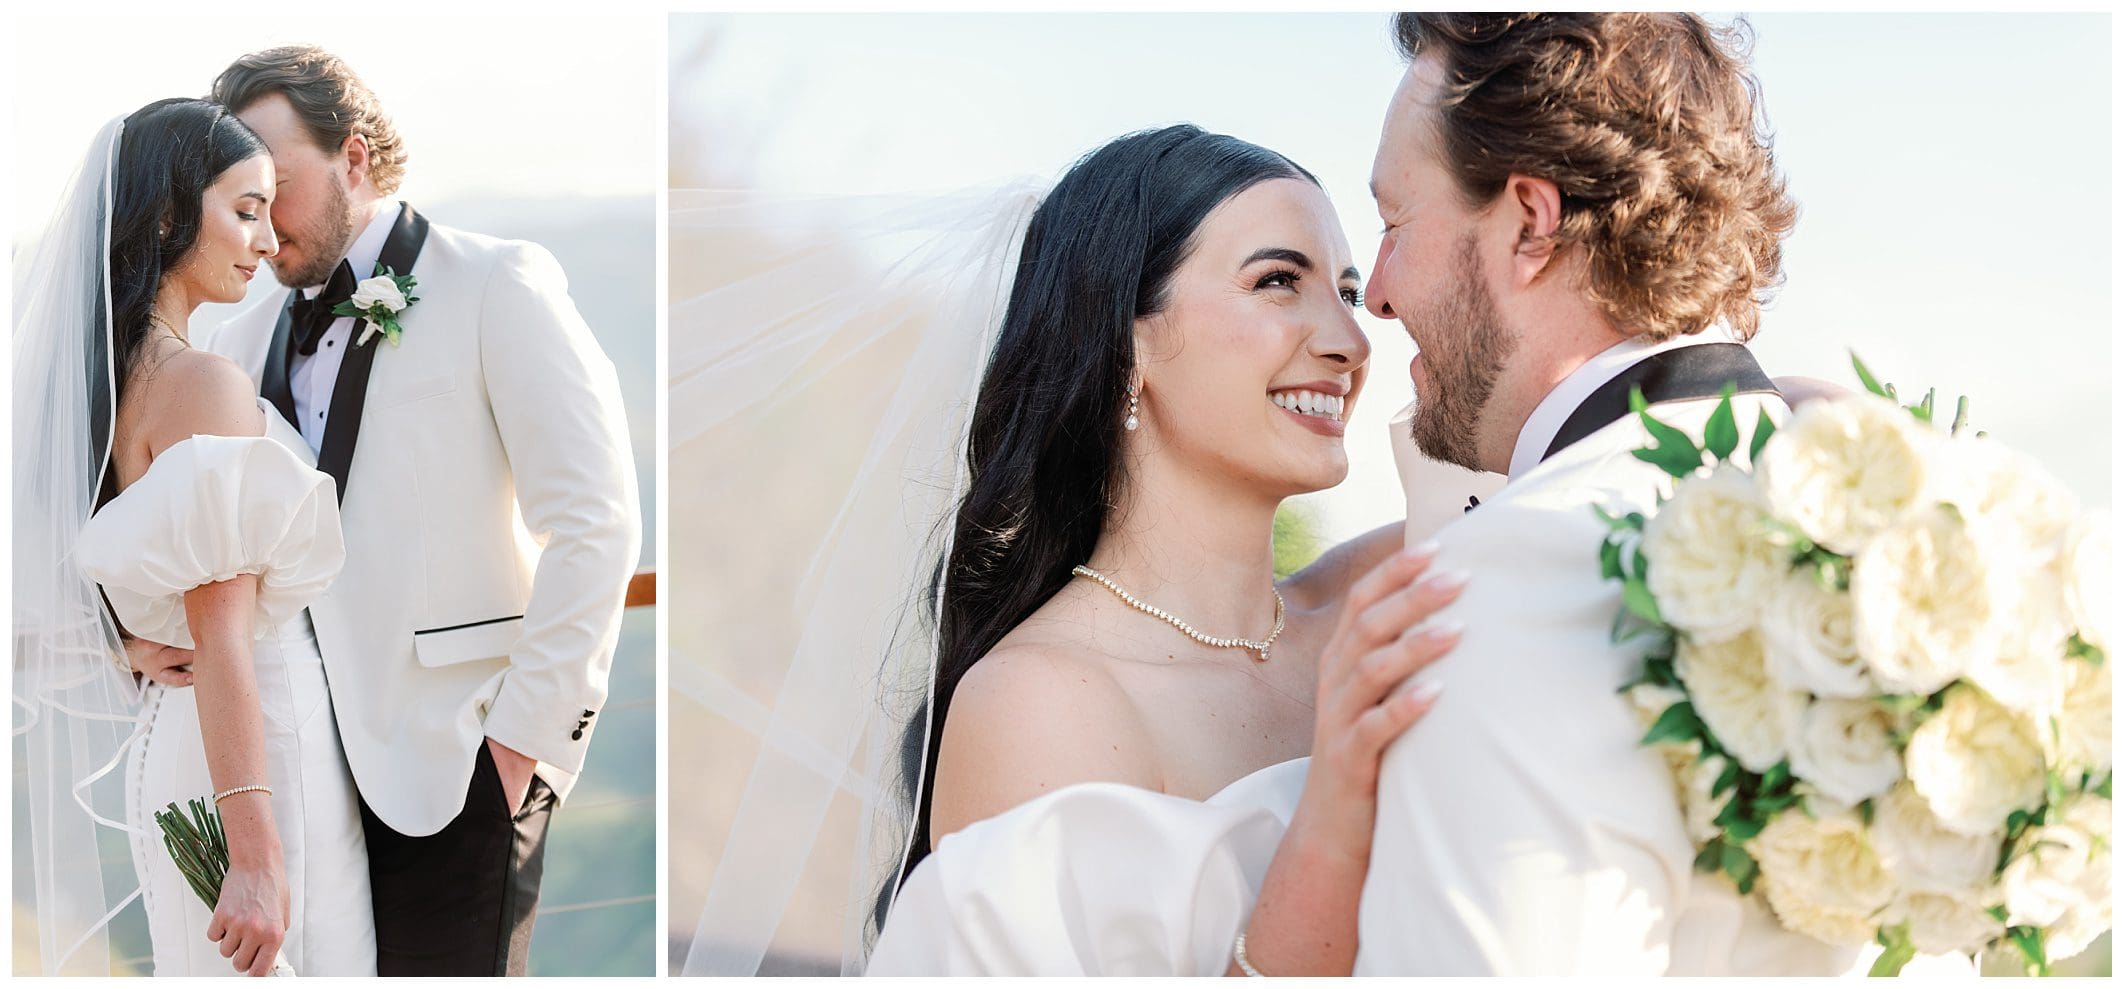 A triptych of a bride and groom: left image shows them touching foreheads, center image features the bride smiling, right image focuses on them embracing with a visible bouquet.